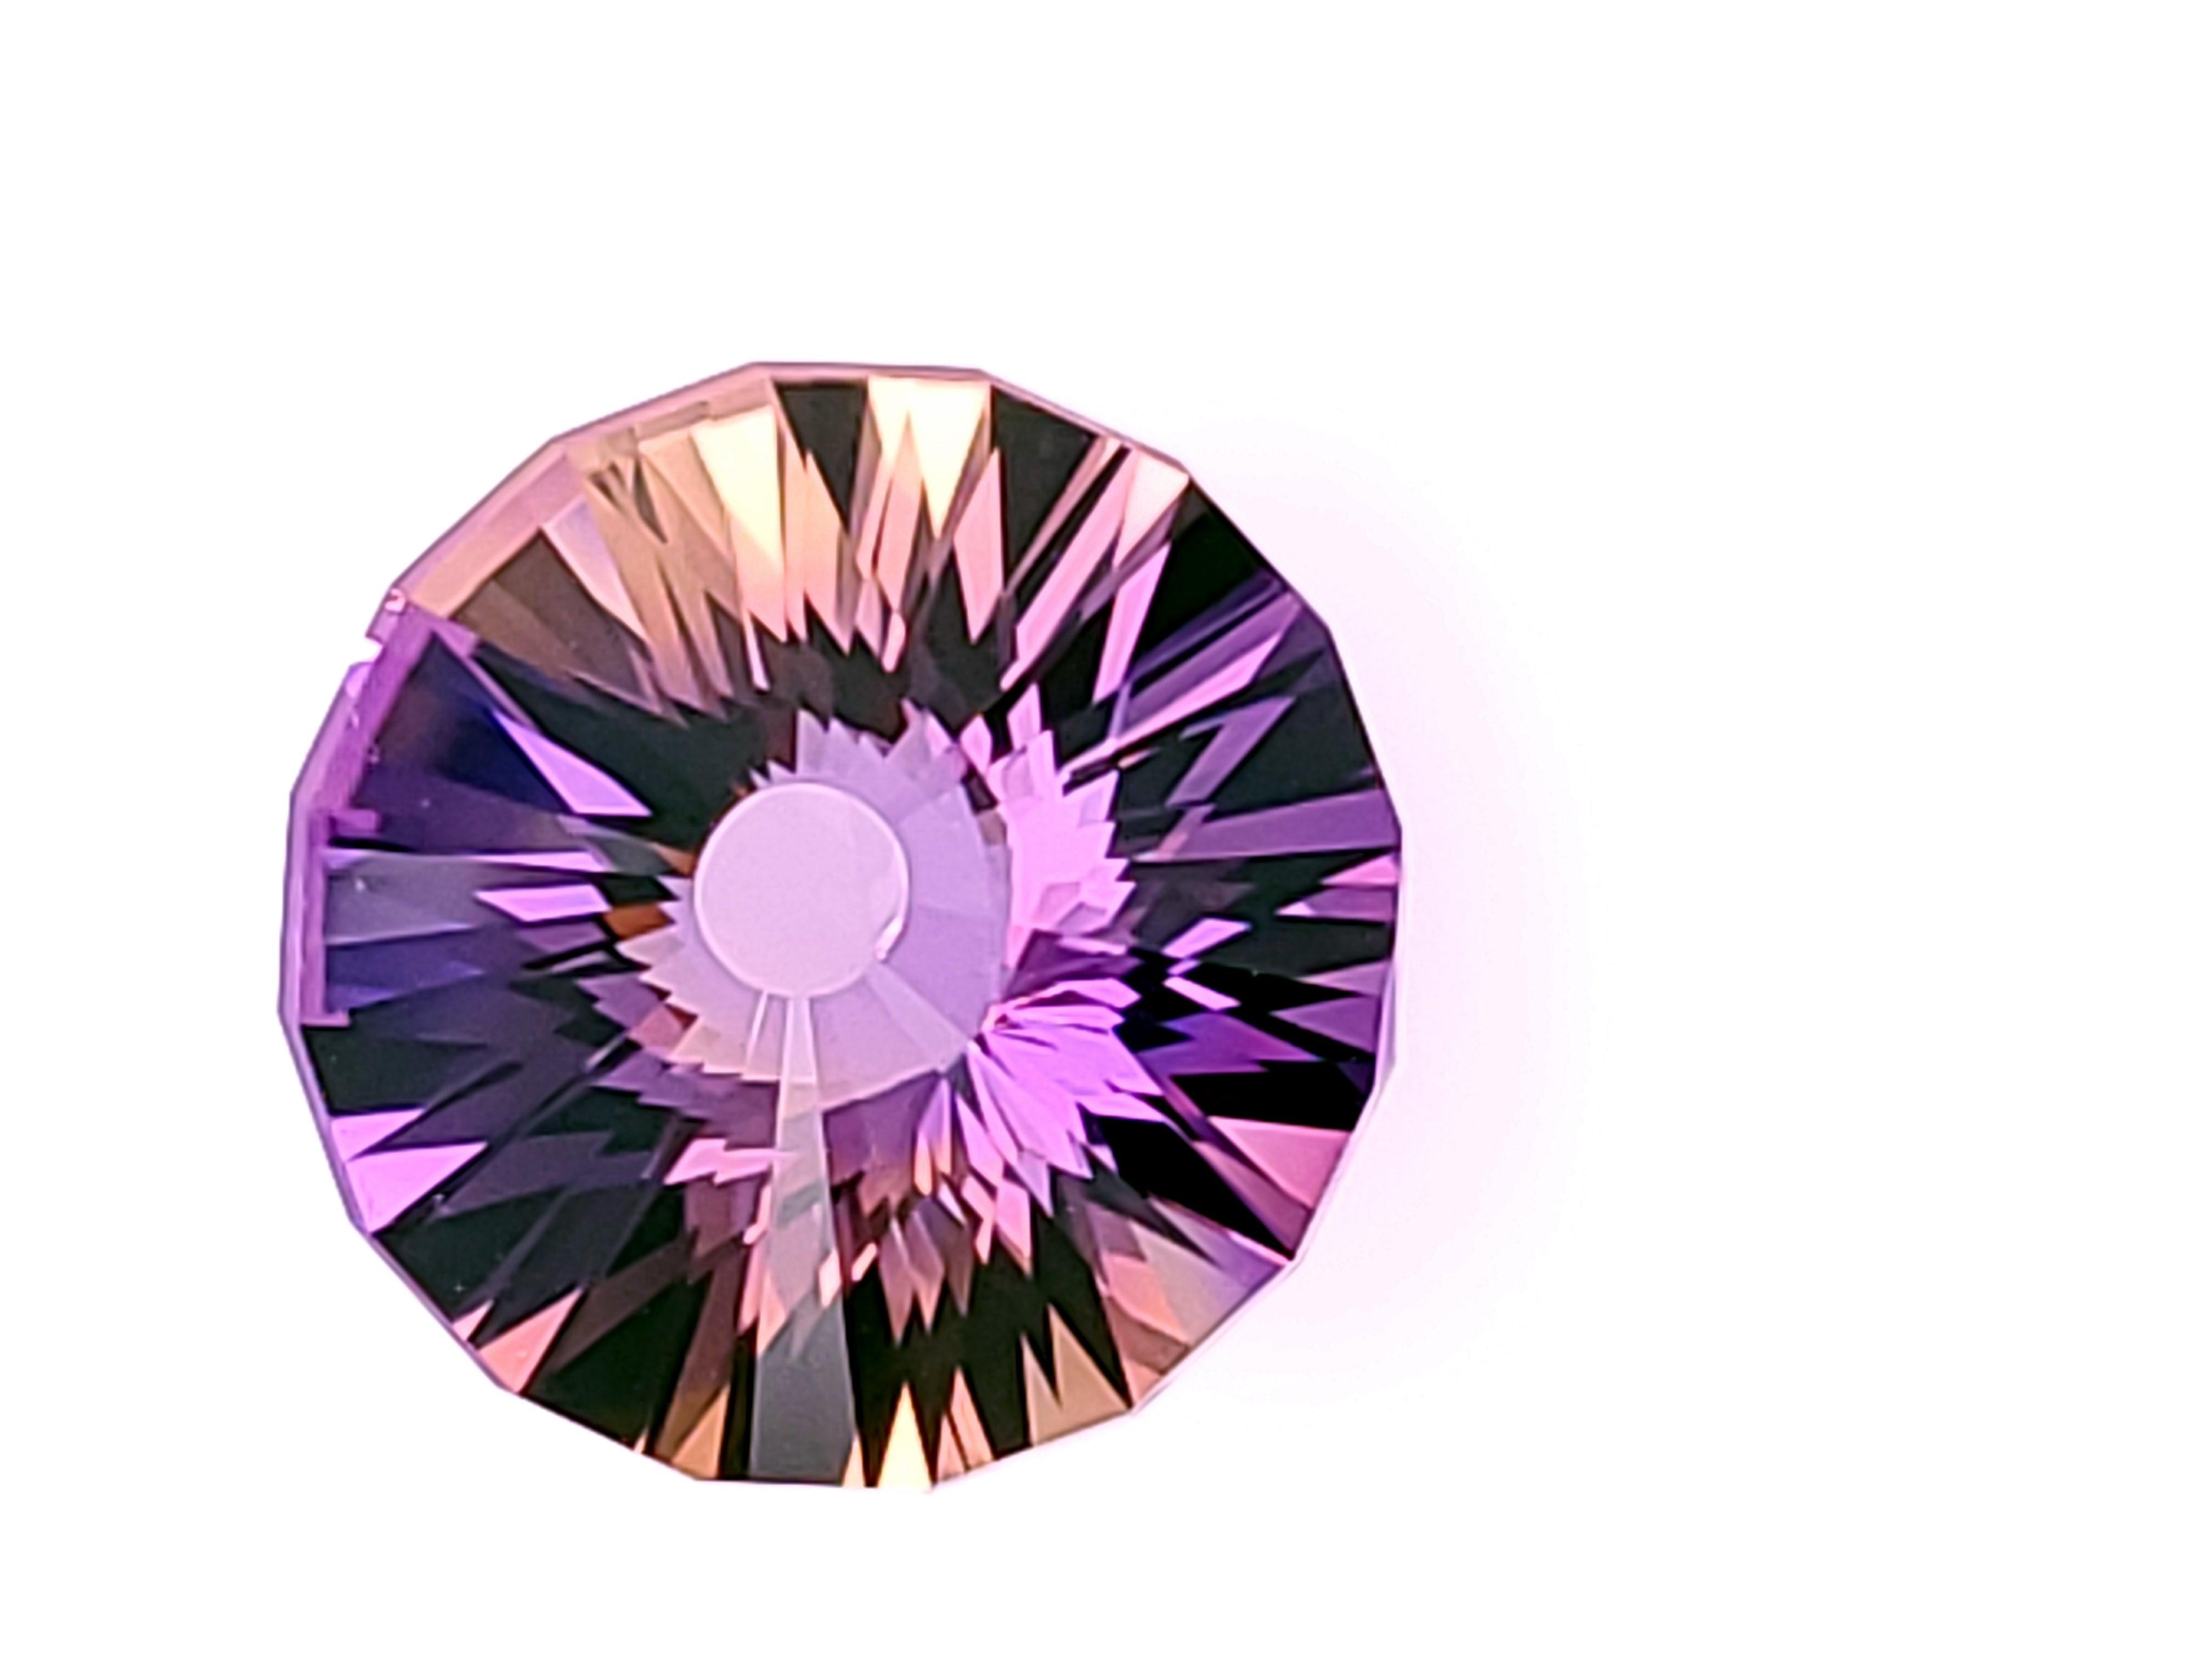 A Lively Blended Natural Ametrine in a Fancy Round Design weighing 13.18cts.  This particular gemstone was faceted from our rough by one of our Specialty Cutters, creating this unique, brilliant, lively multi-colored beauty!   Our rough is hand